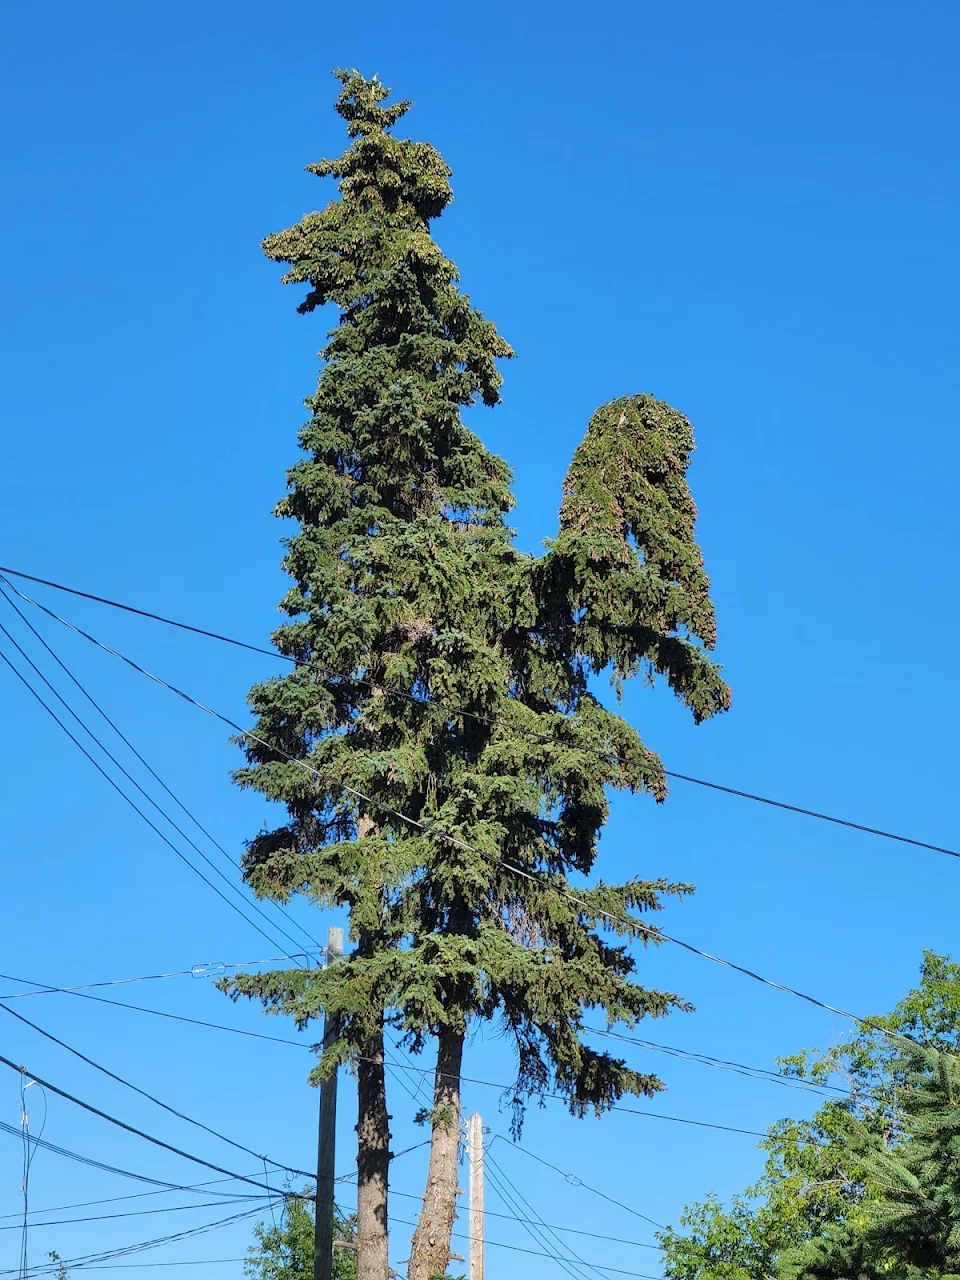 This pic of some trees that look like a rooster